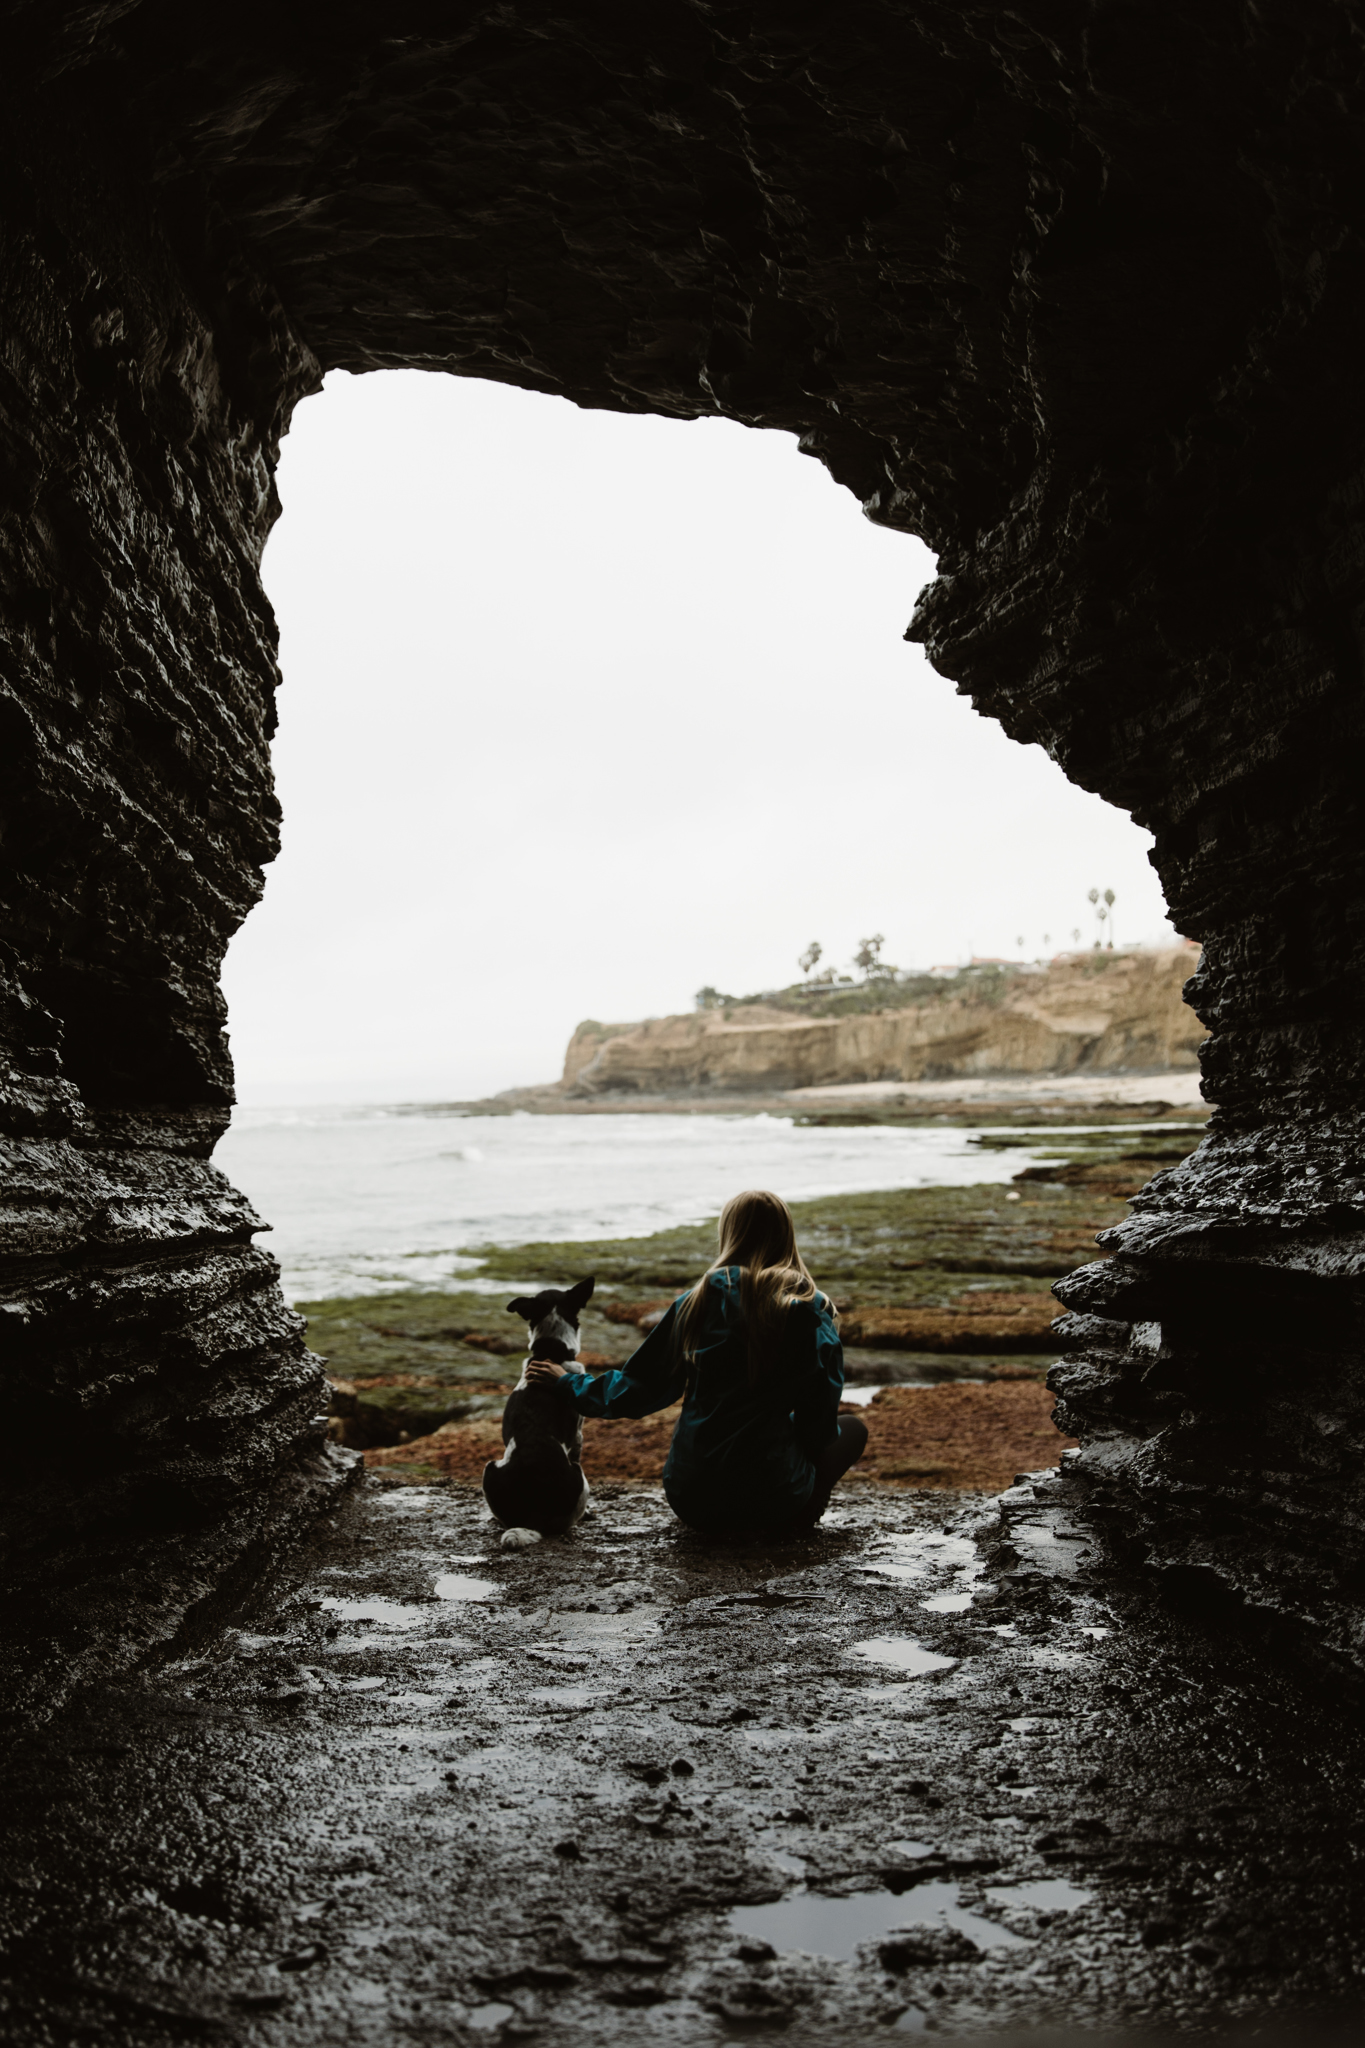 exploring san diego | utah and california adventure elopement photographers | the hearnes adventure photography | www.thehearnes.com